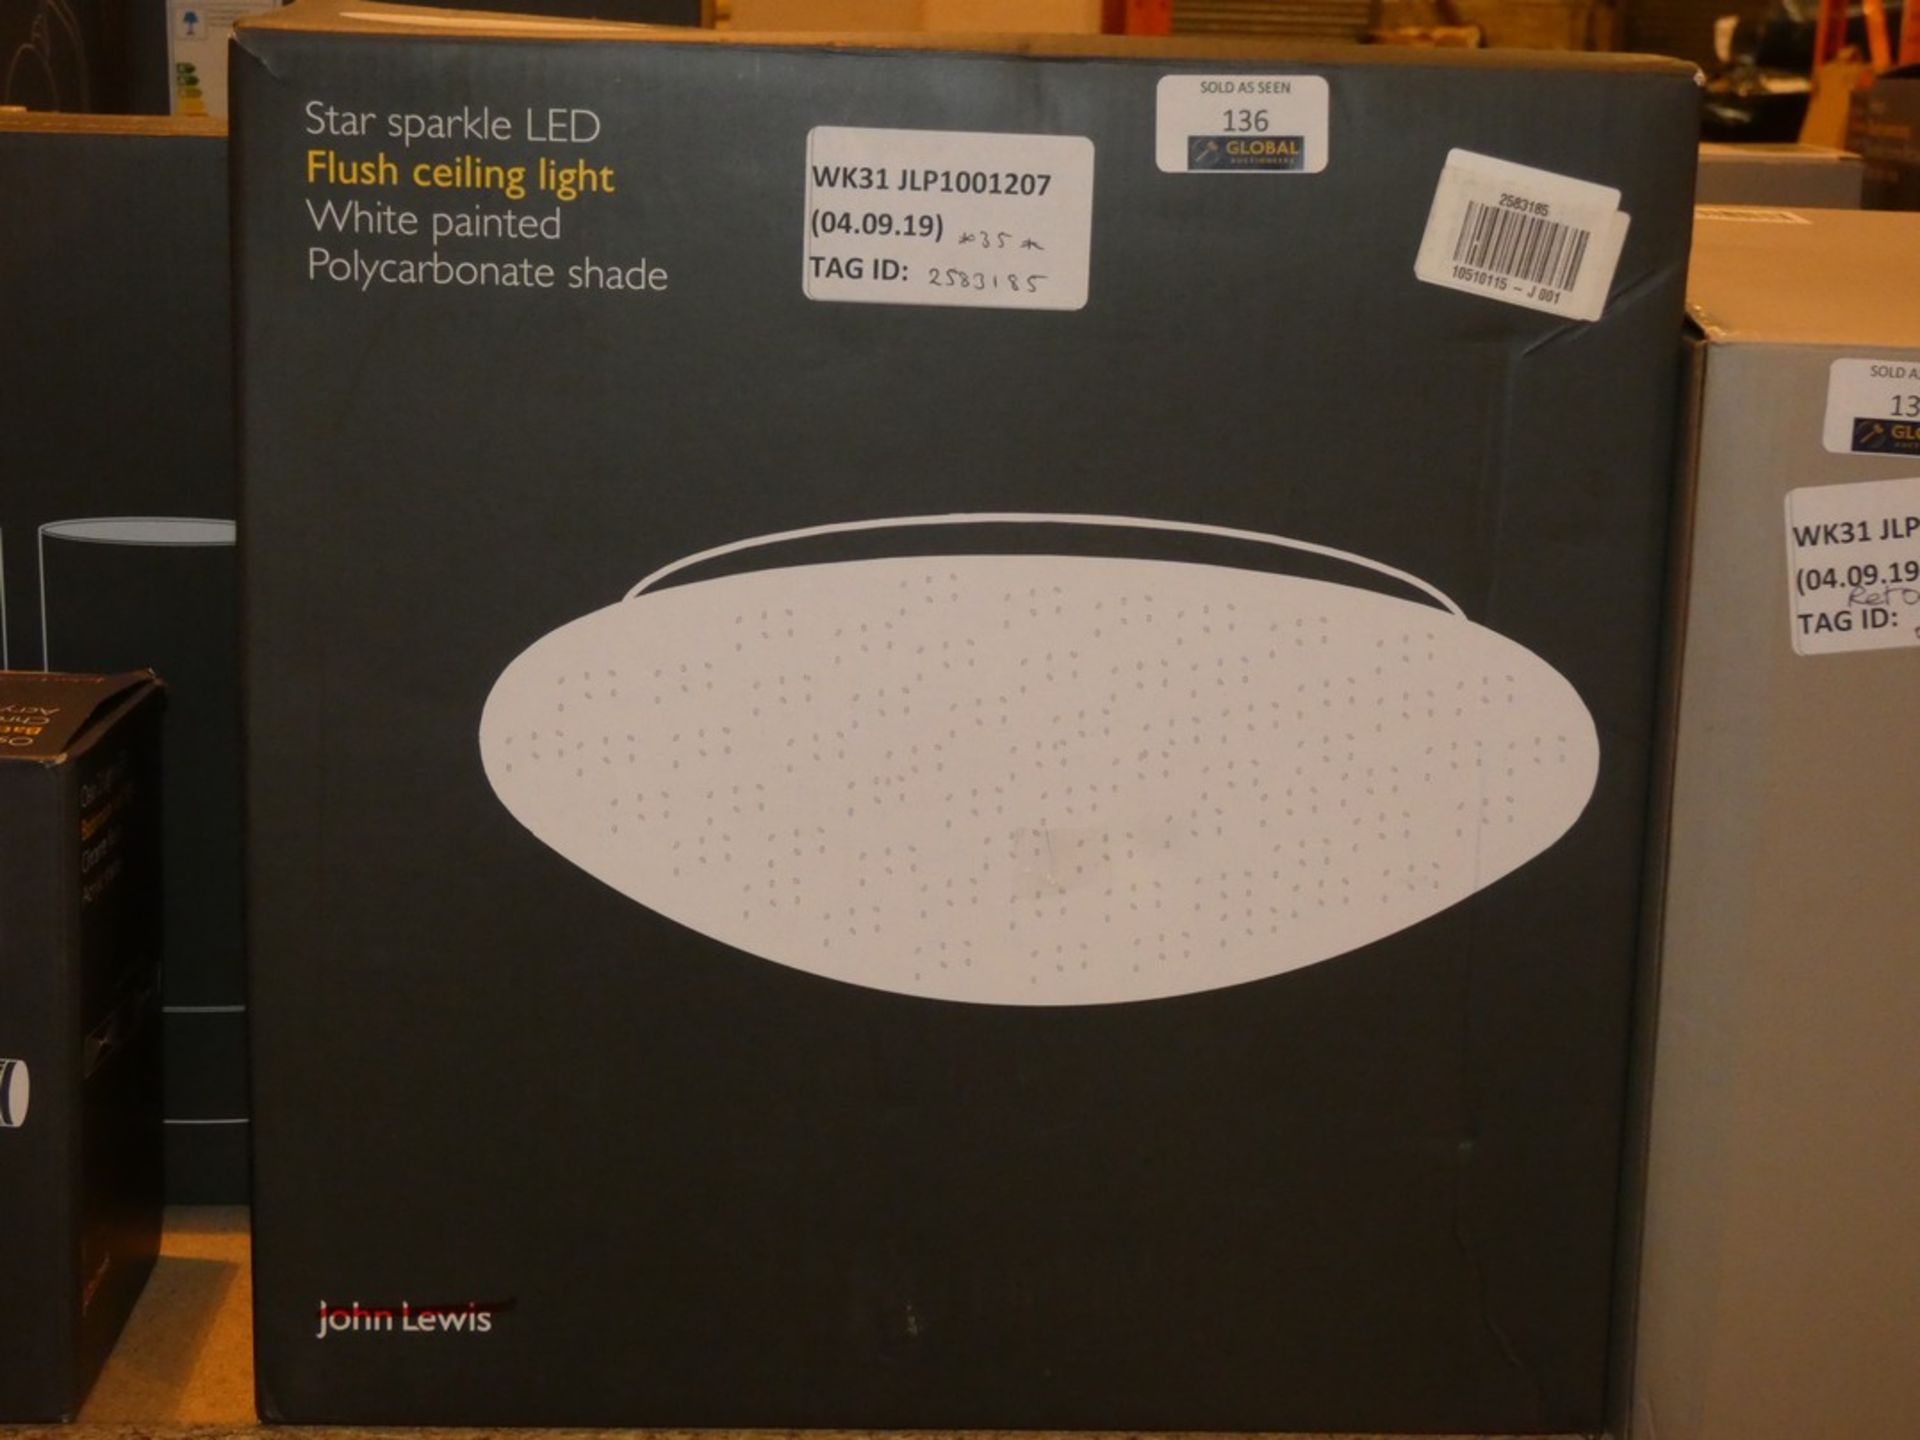 Lot to Contain 2 Boxed John Lewis and Partners Star Sparkle LED White Painted Ceiling Lights